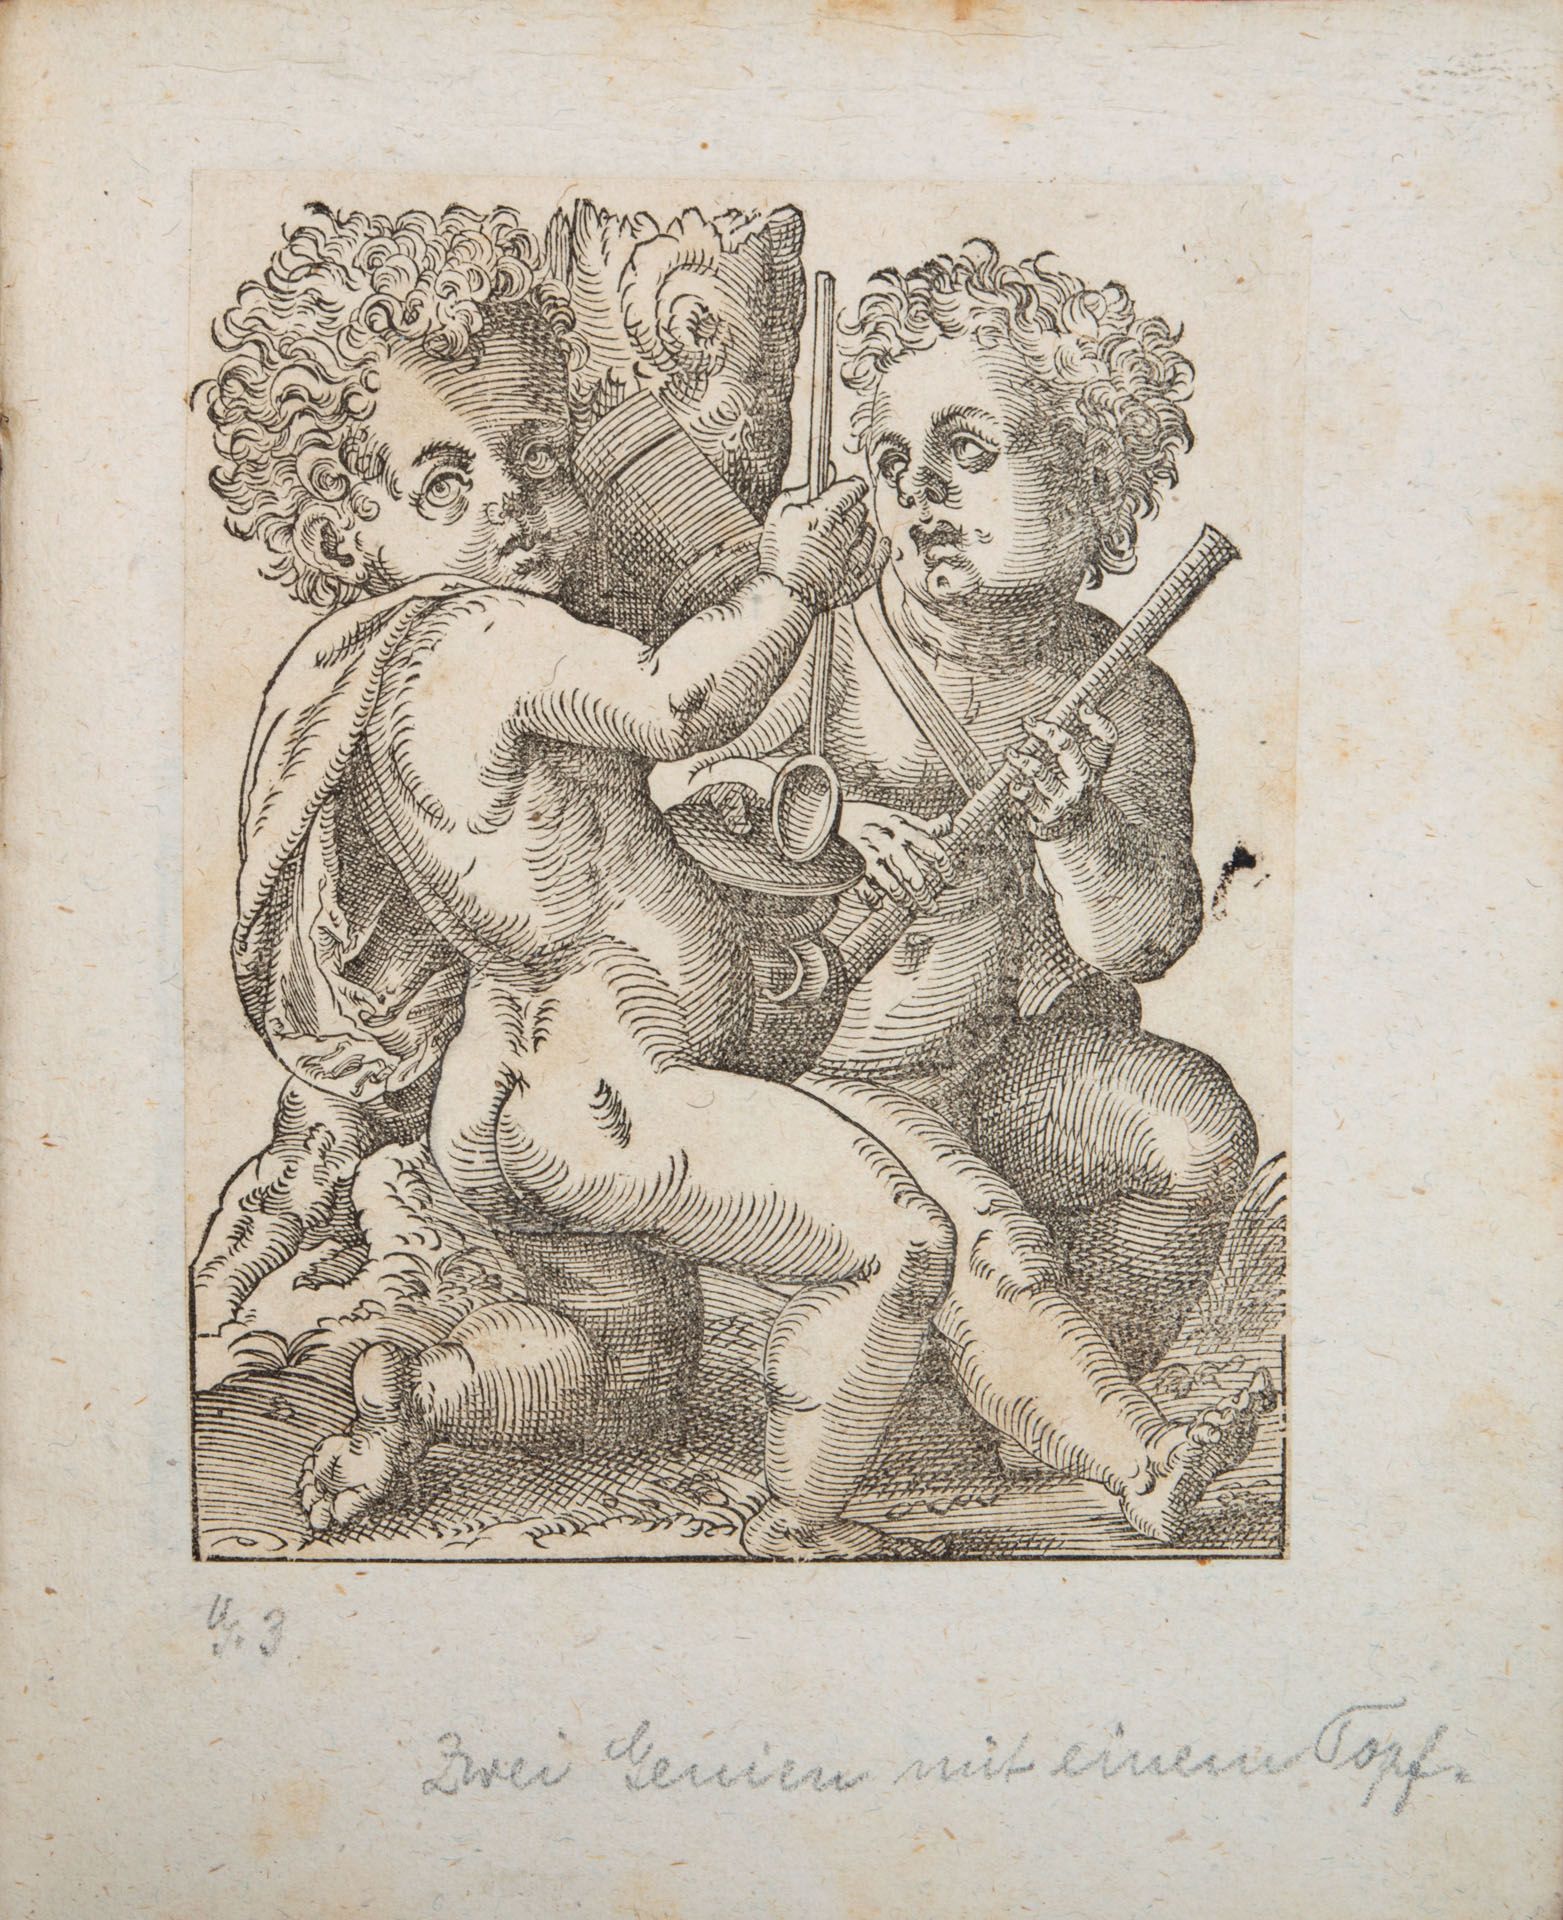 Jost Amman (1539-1591), An Album of 32 Original Engraving from the 16th Century - Image 7 of 7